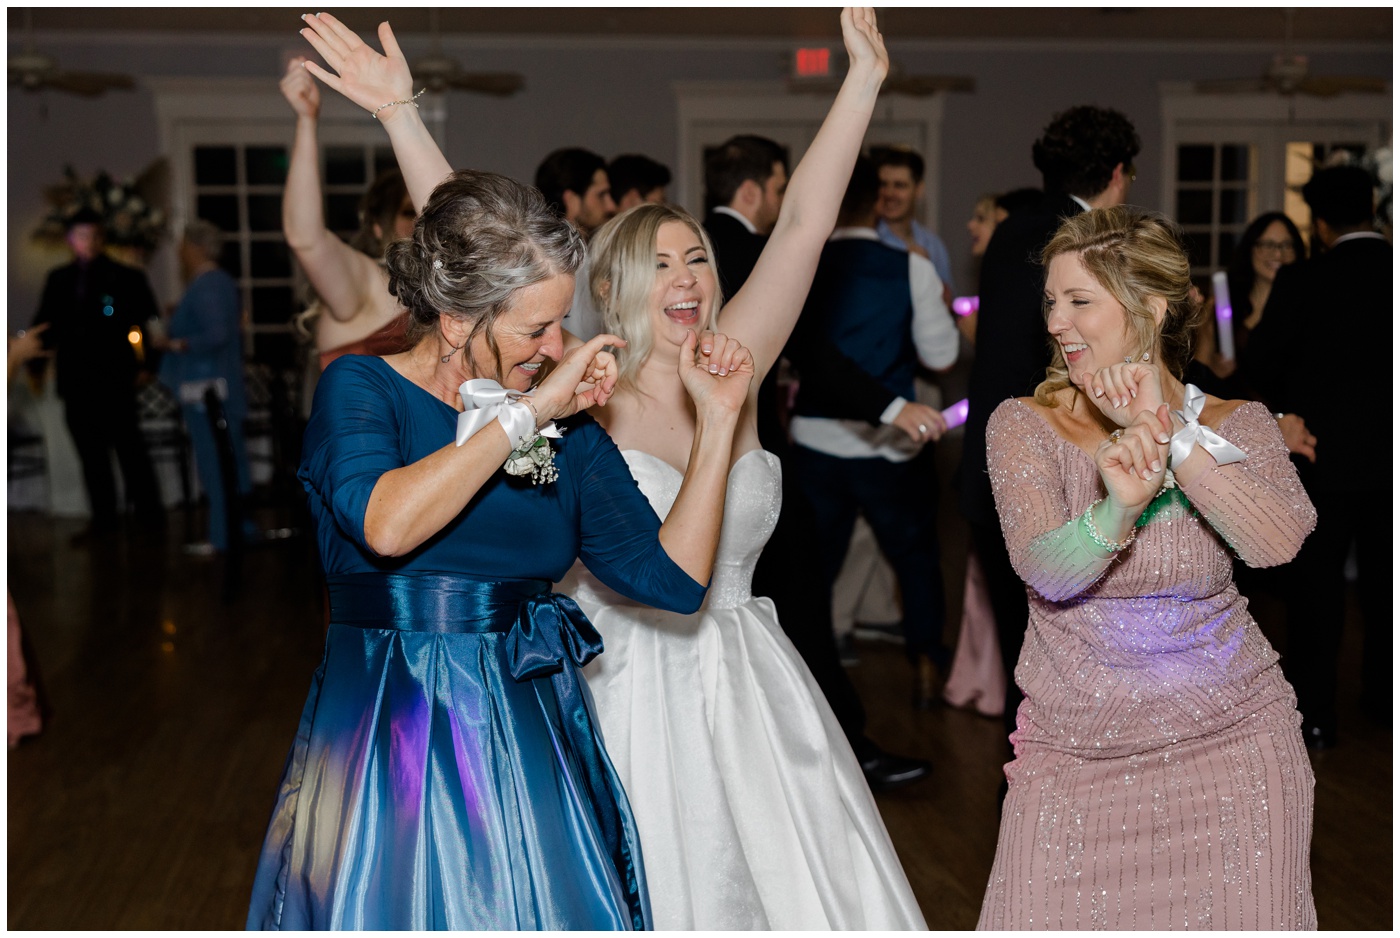 The bride dances with her mom and mother in law.